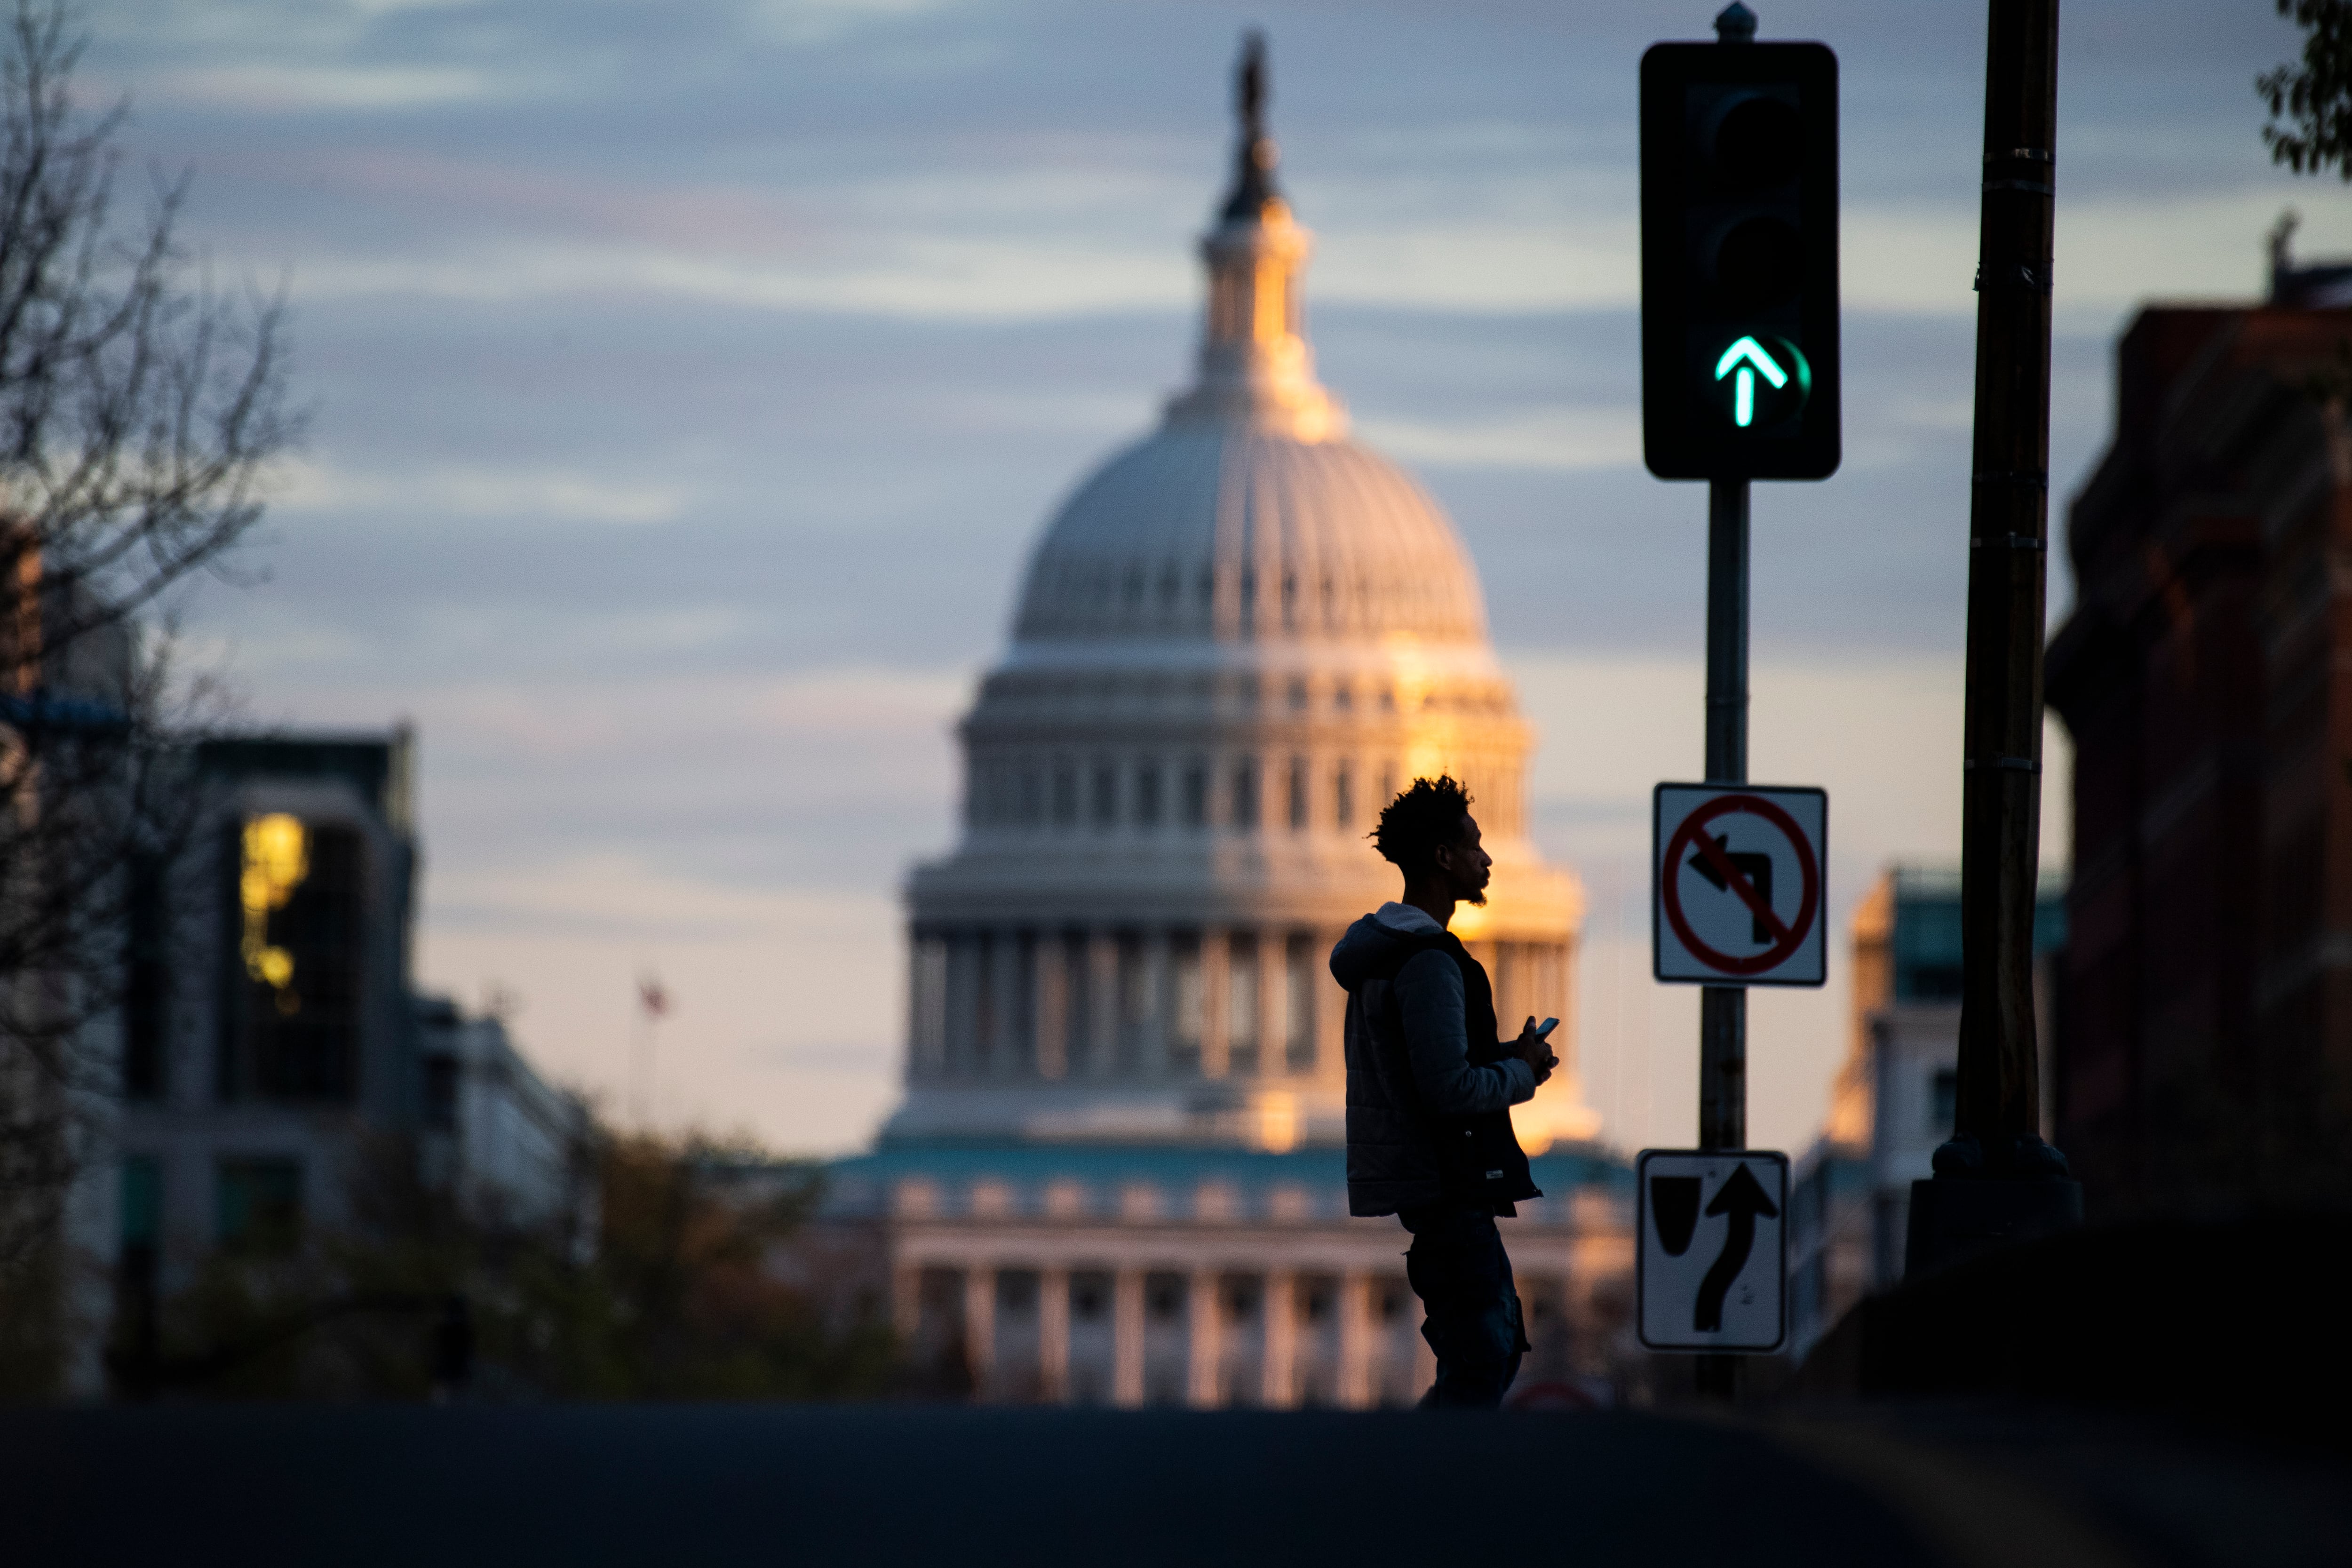 A man walks in front of the U.S. Capitol building during the coronavirus outbreak in April 2020.